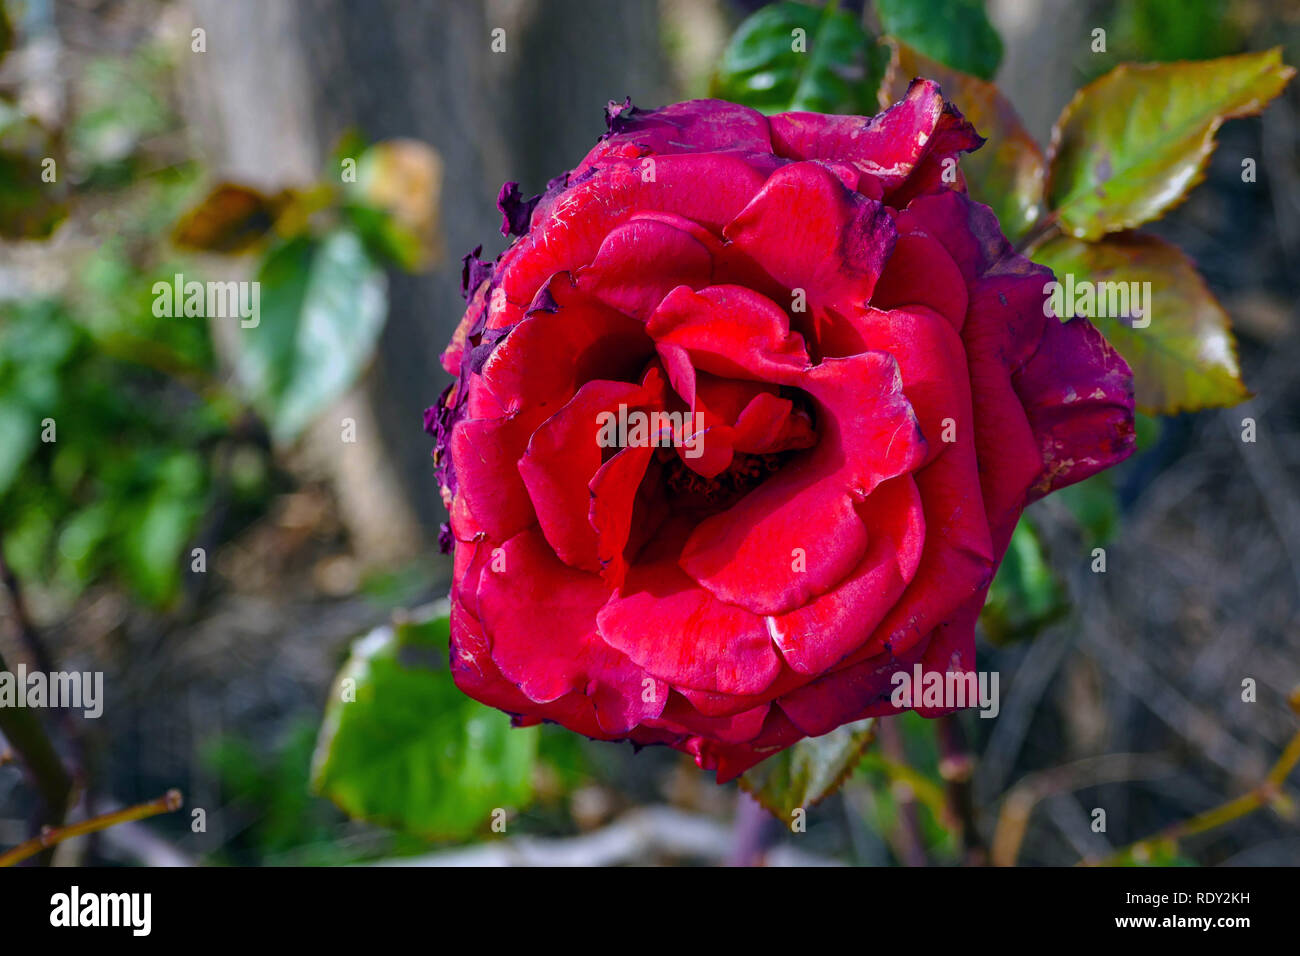 Single red rose past its best, looking tatty and old Stock Photo